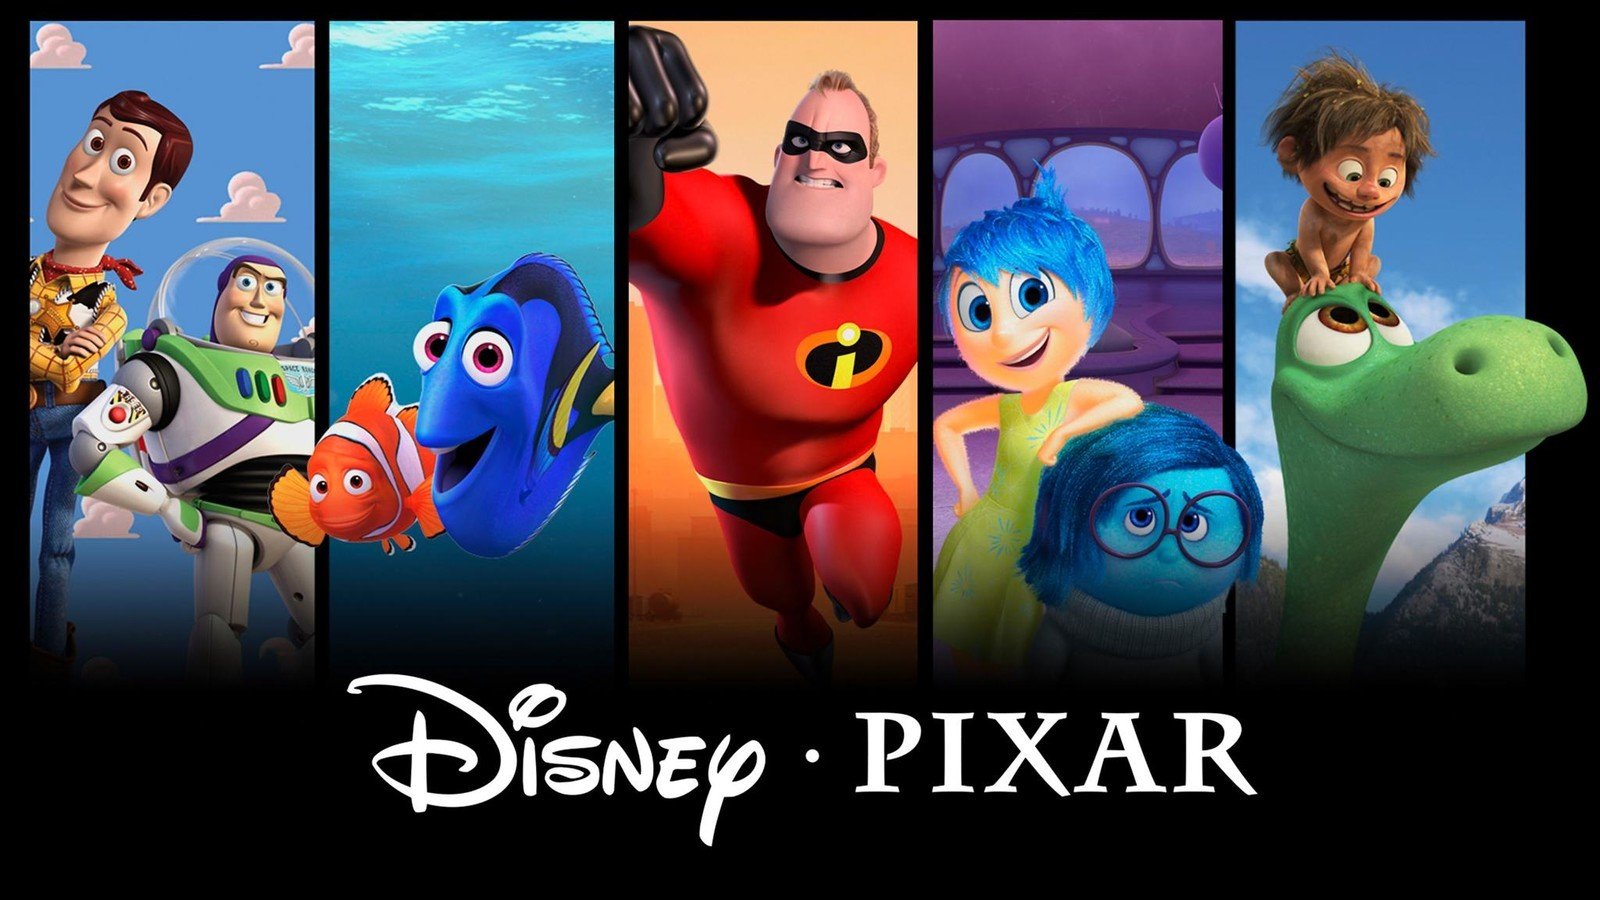 What movies does Disney+ have?